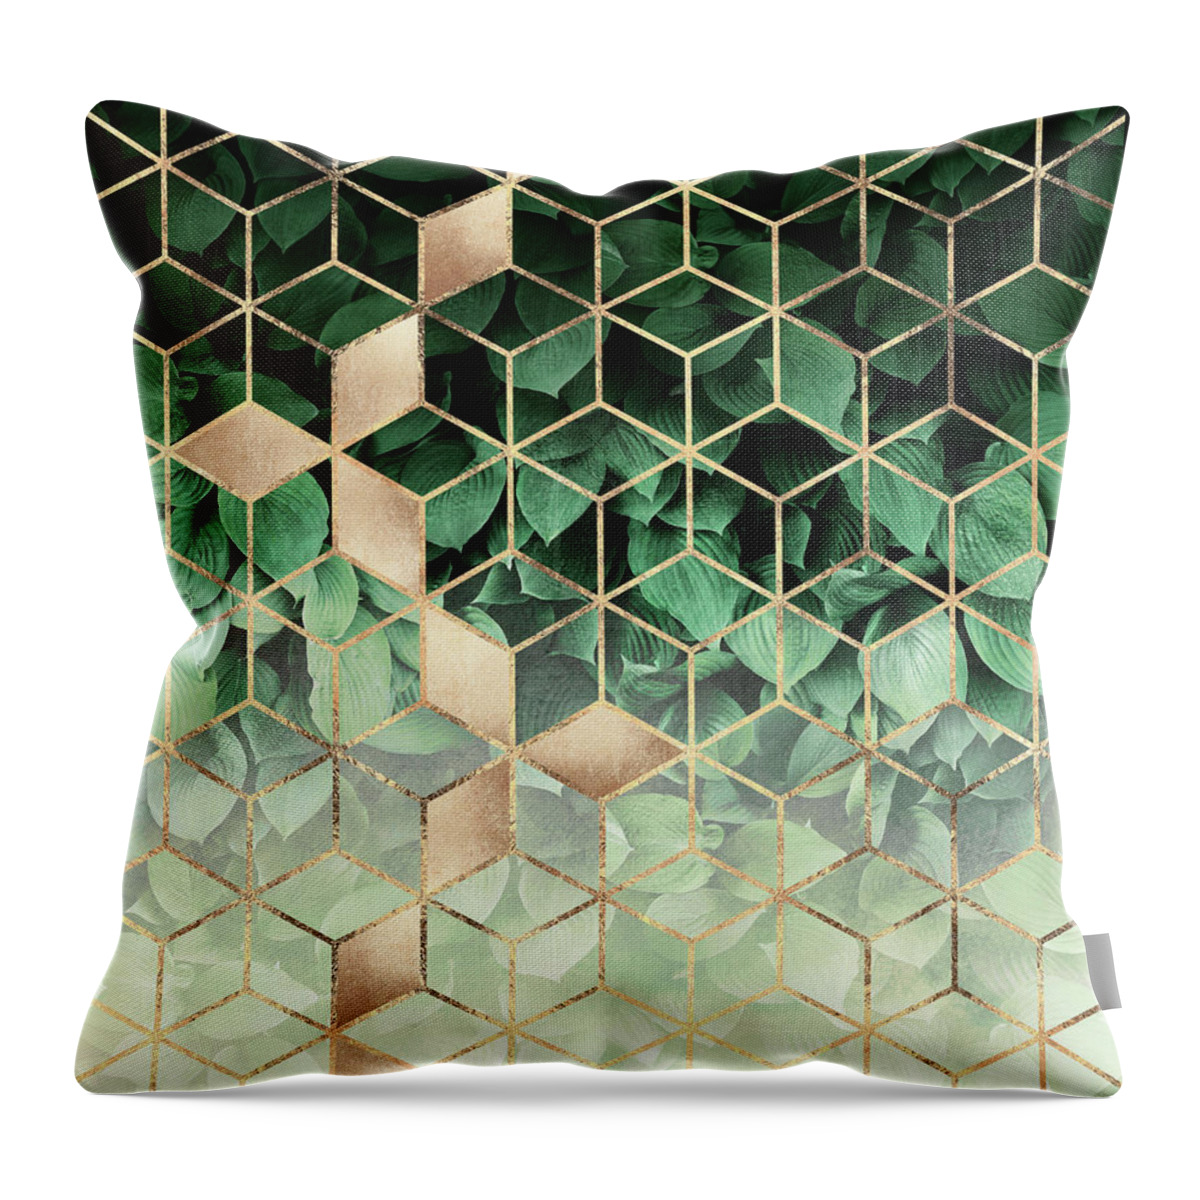 Graphic Throw Pillow featuring the digital art Leaves And Cubes by Elisabeth Fredriksson